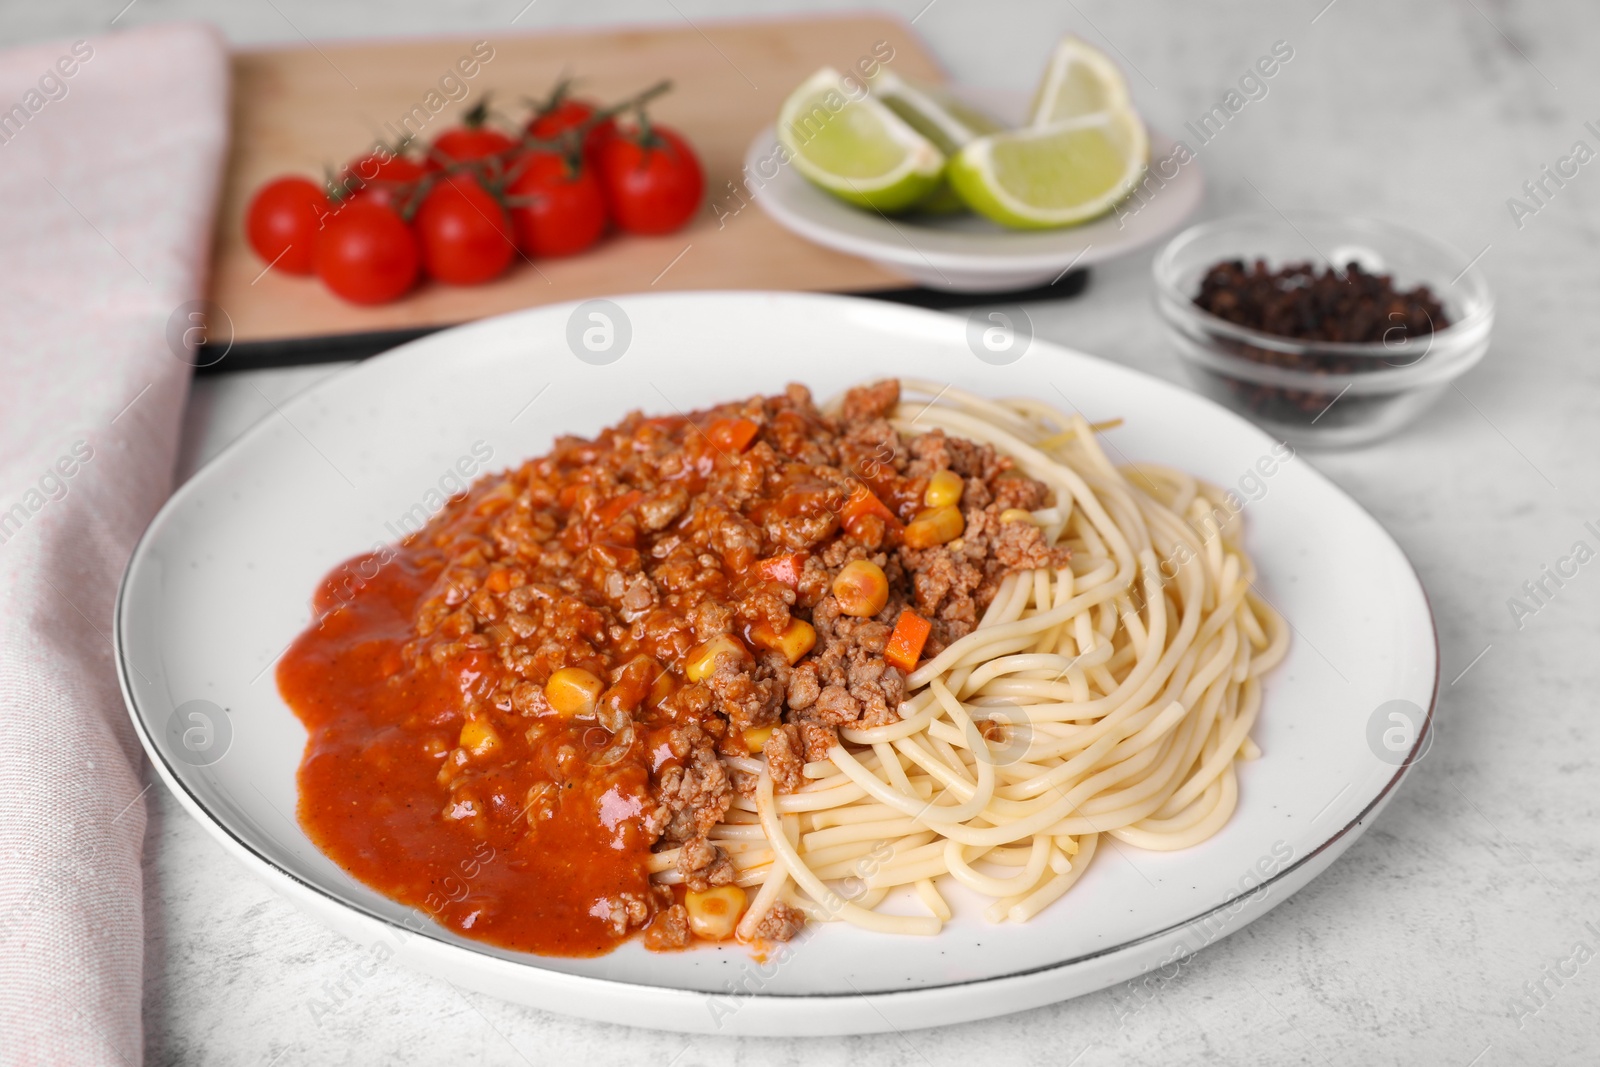 Photo of Tasty dish with fried minced meat, spaghetti, carrot and corn served on white textured table